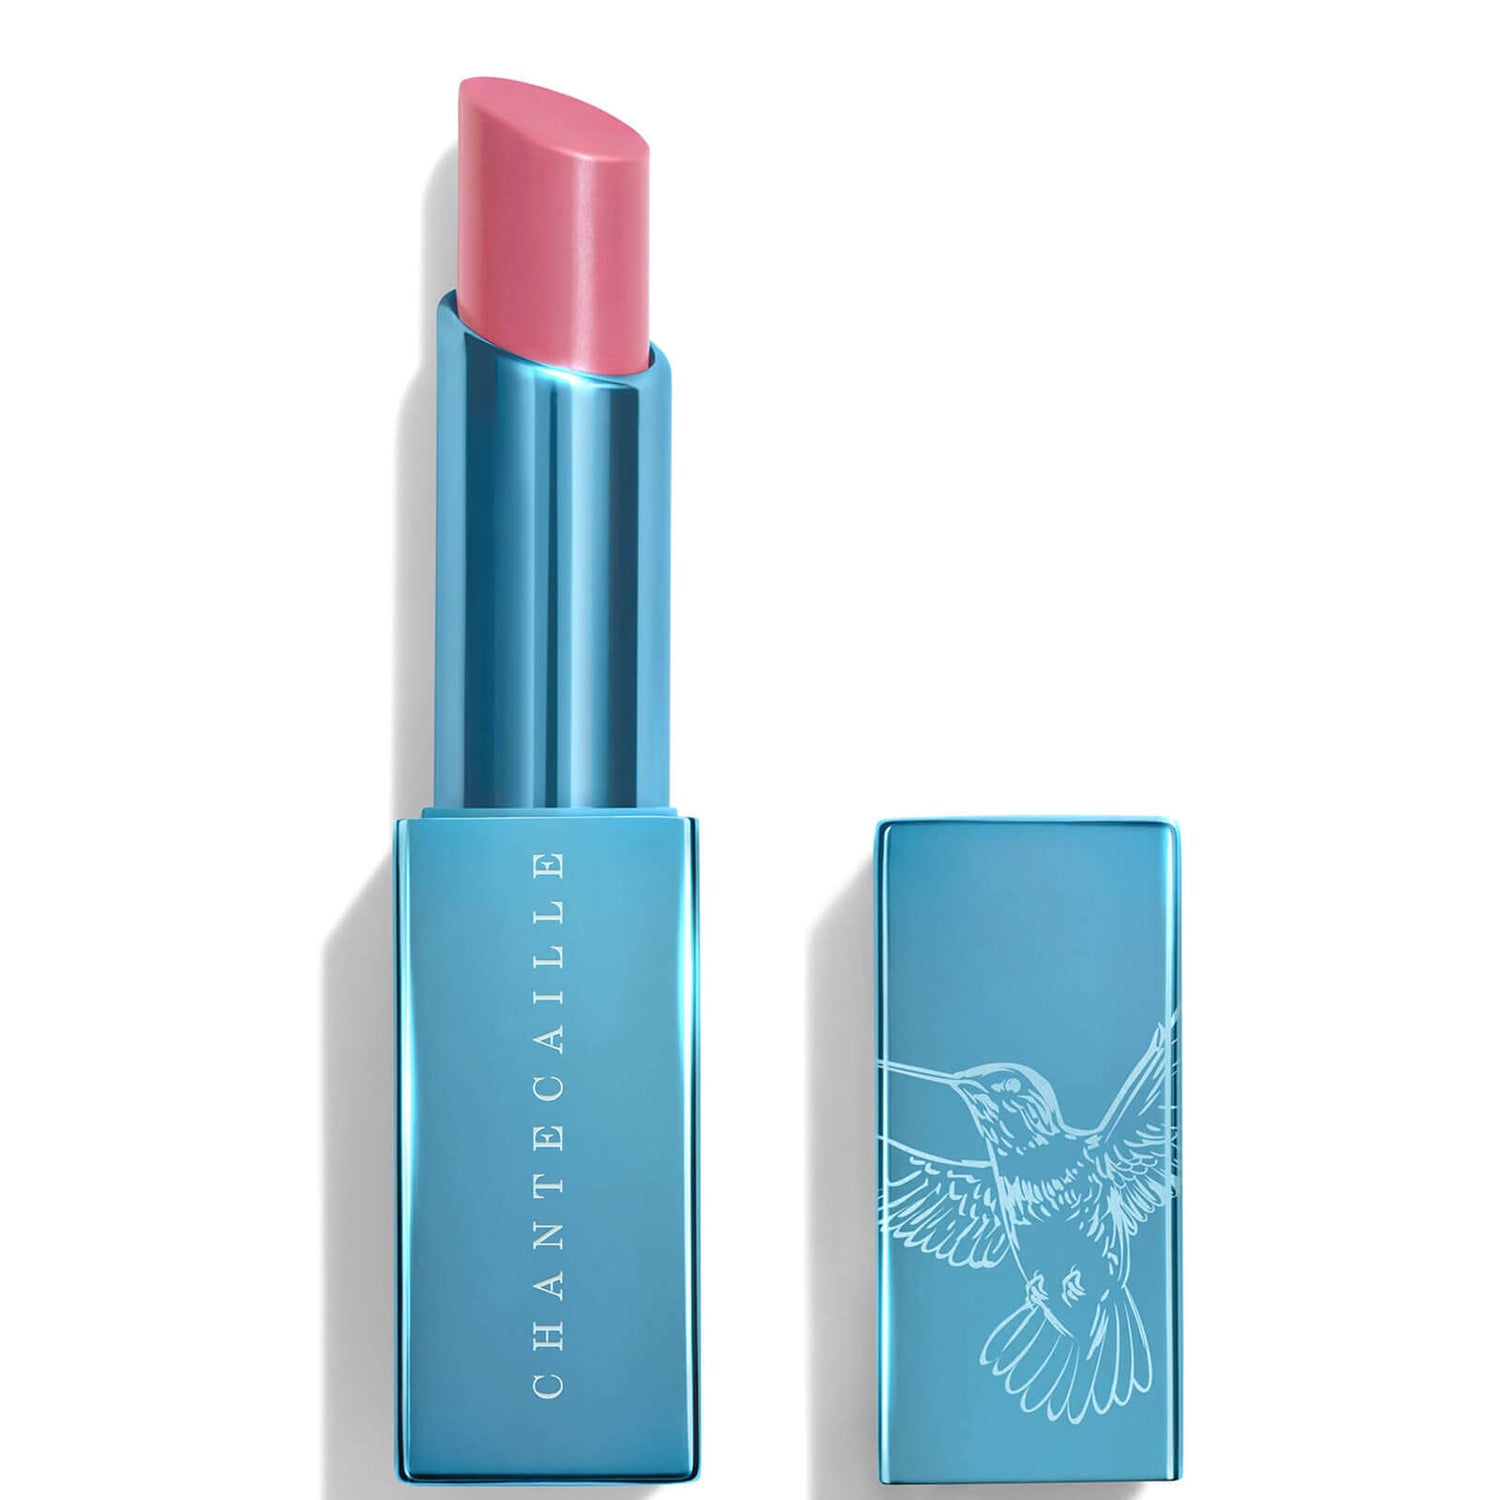 Chantecaille Lip Chic - Lupine